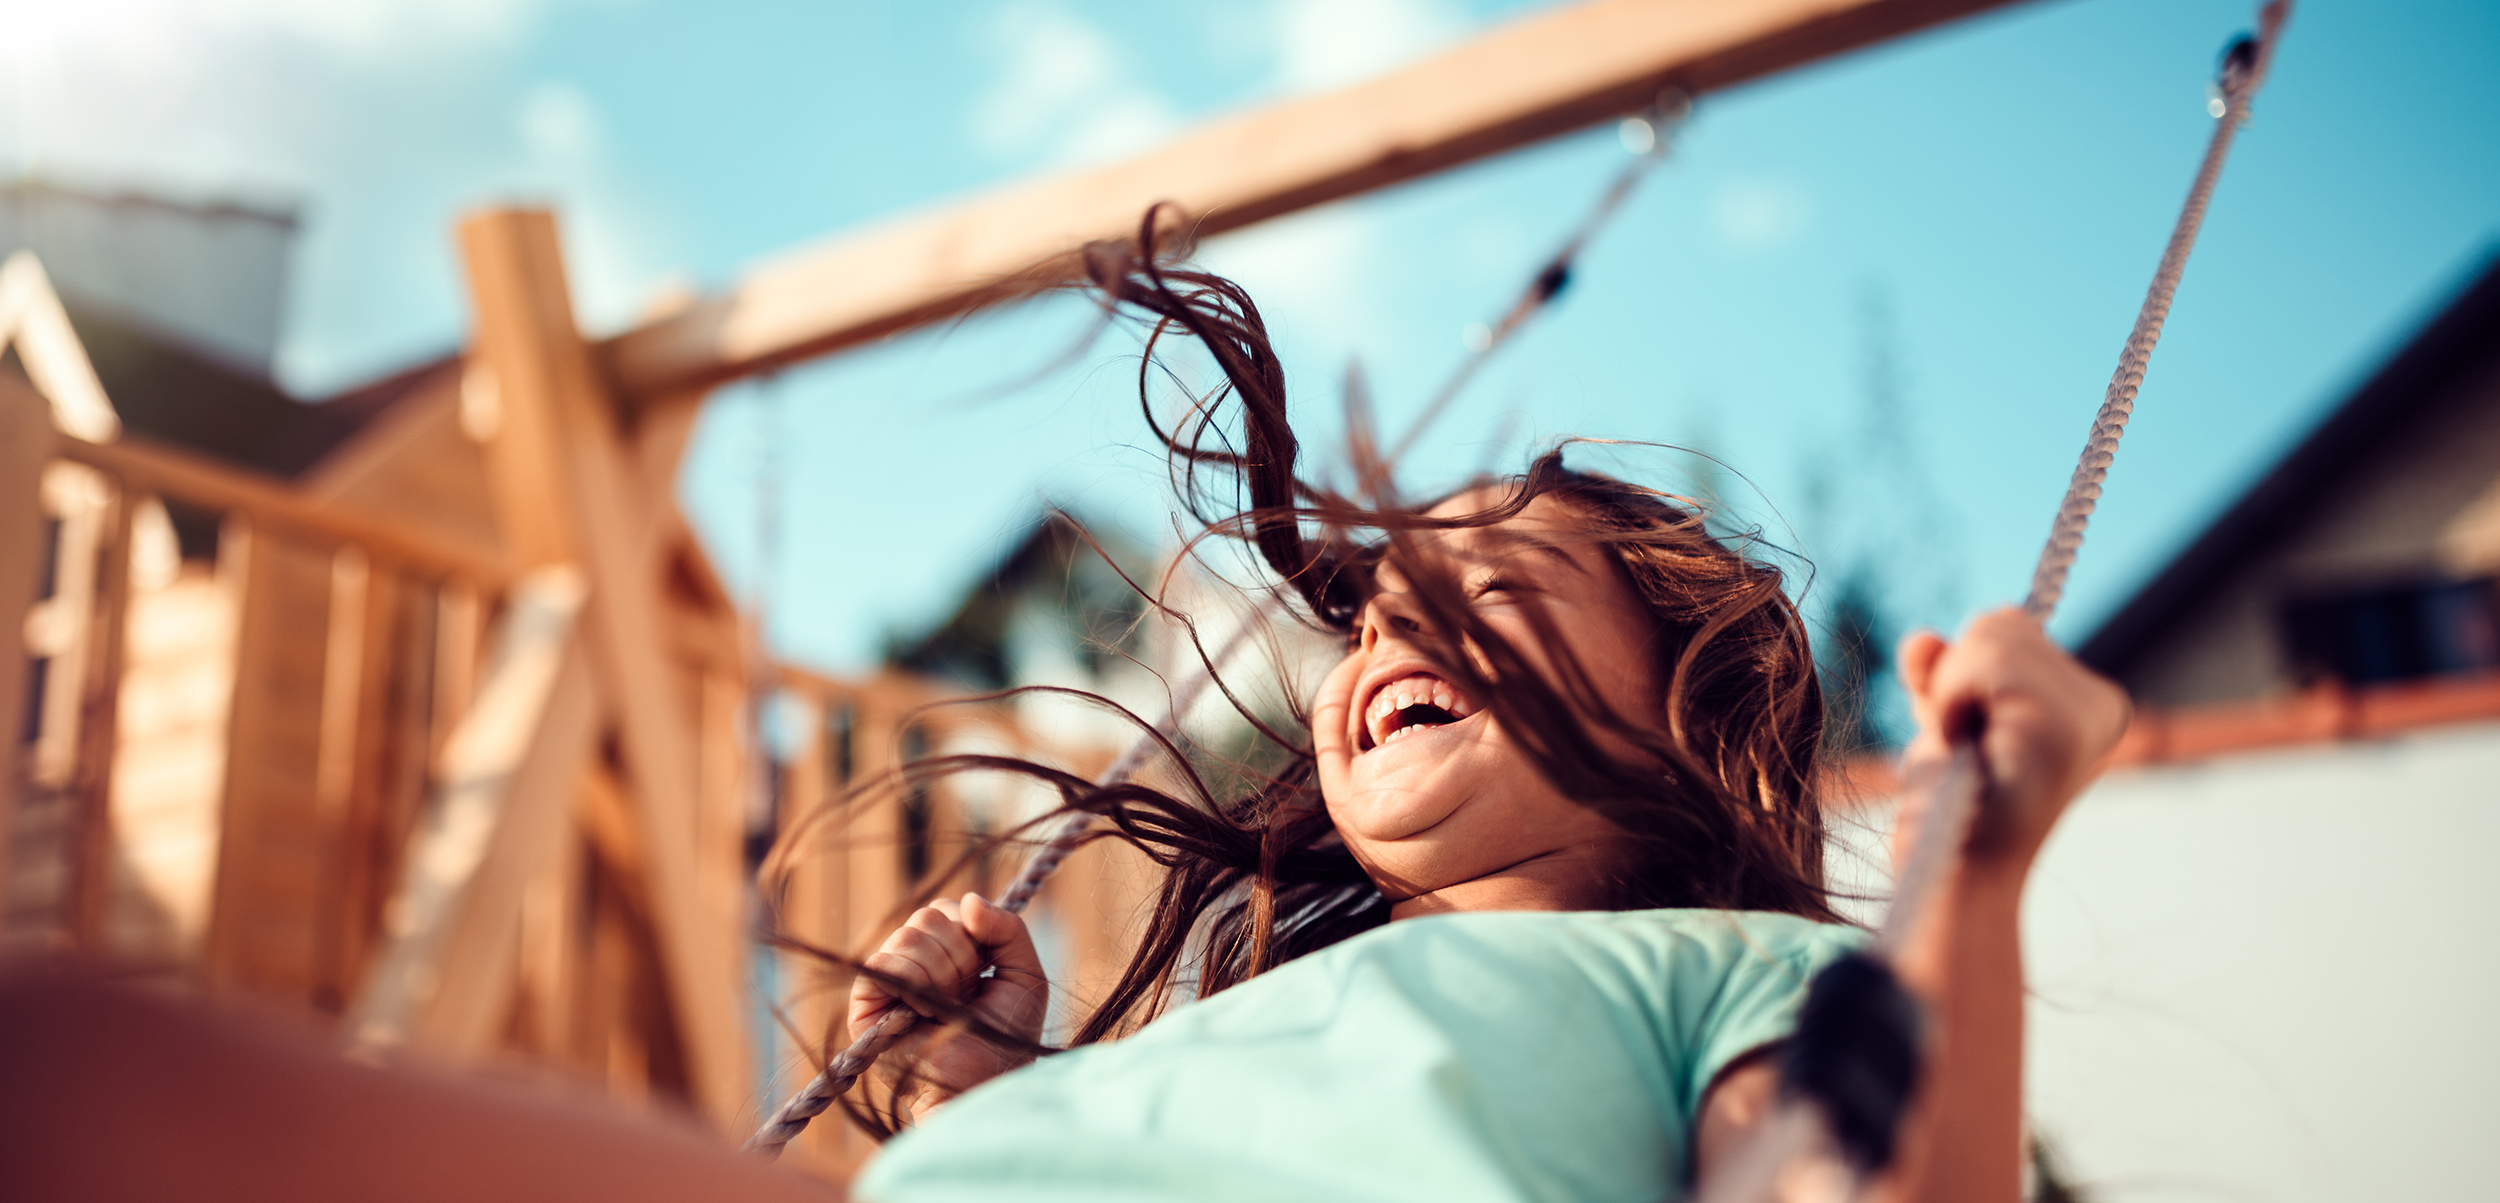 Portrait of a happy little girl wearing green shirt sitting on a swing and smiling